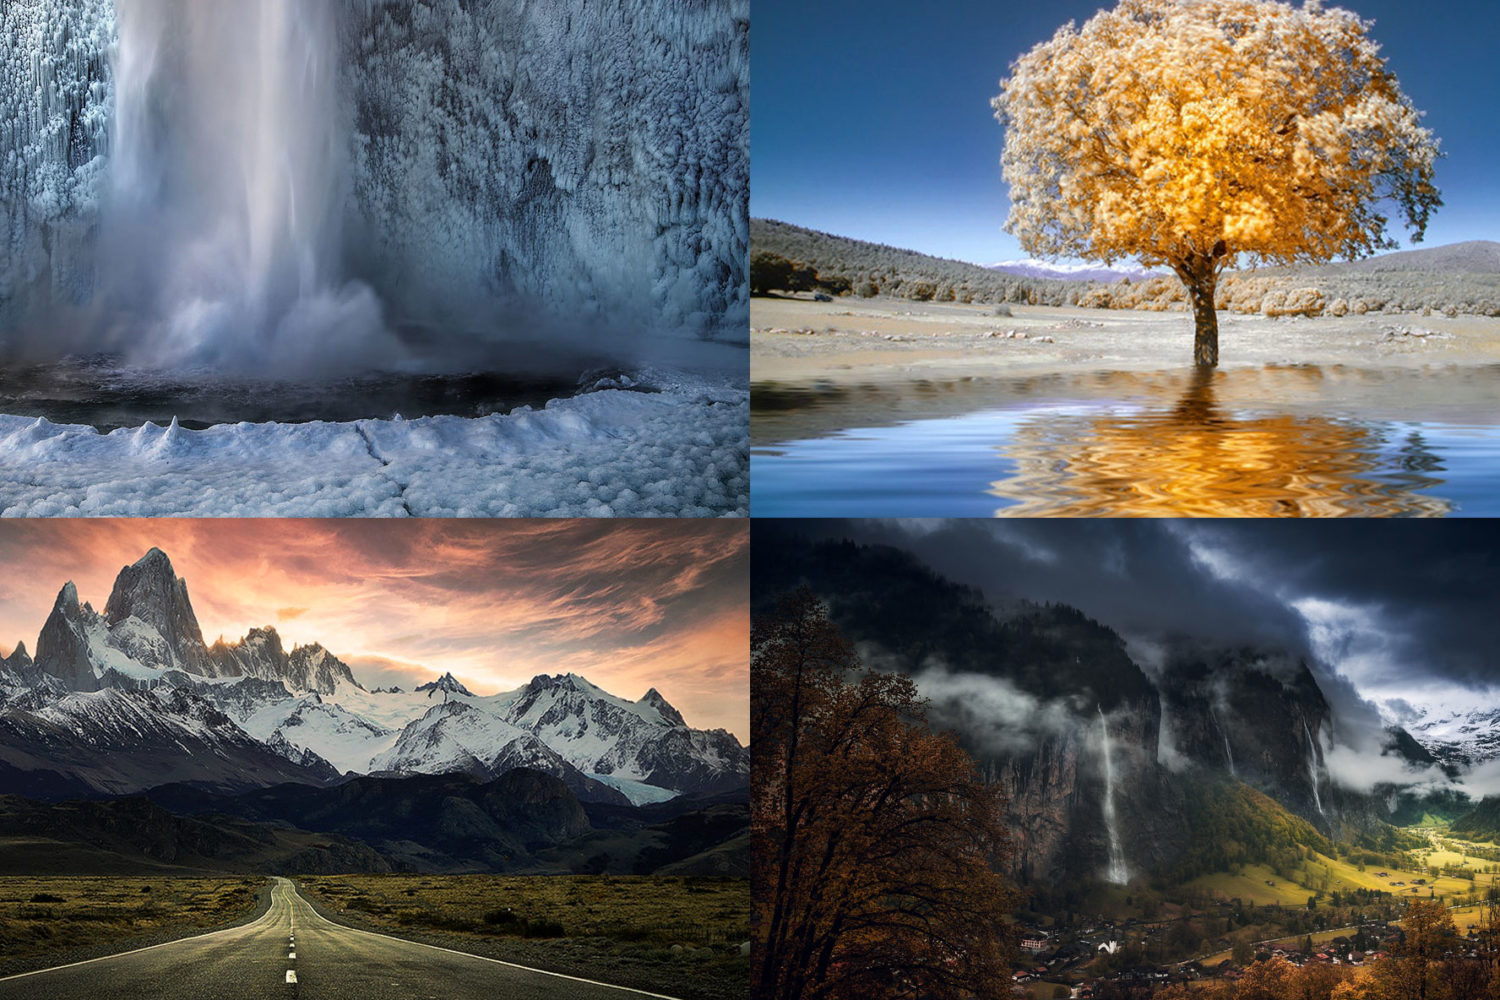 4 Landscape Photography Tutorials All About Post-Processing